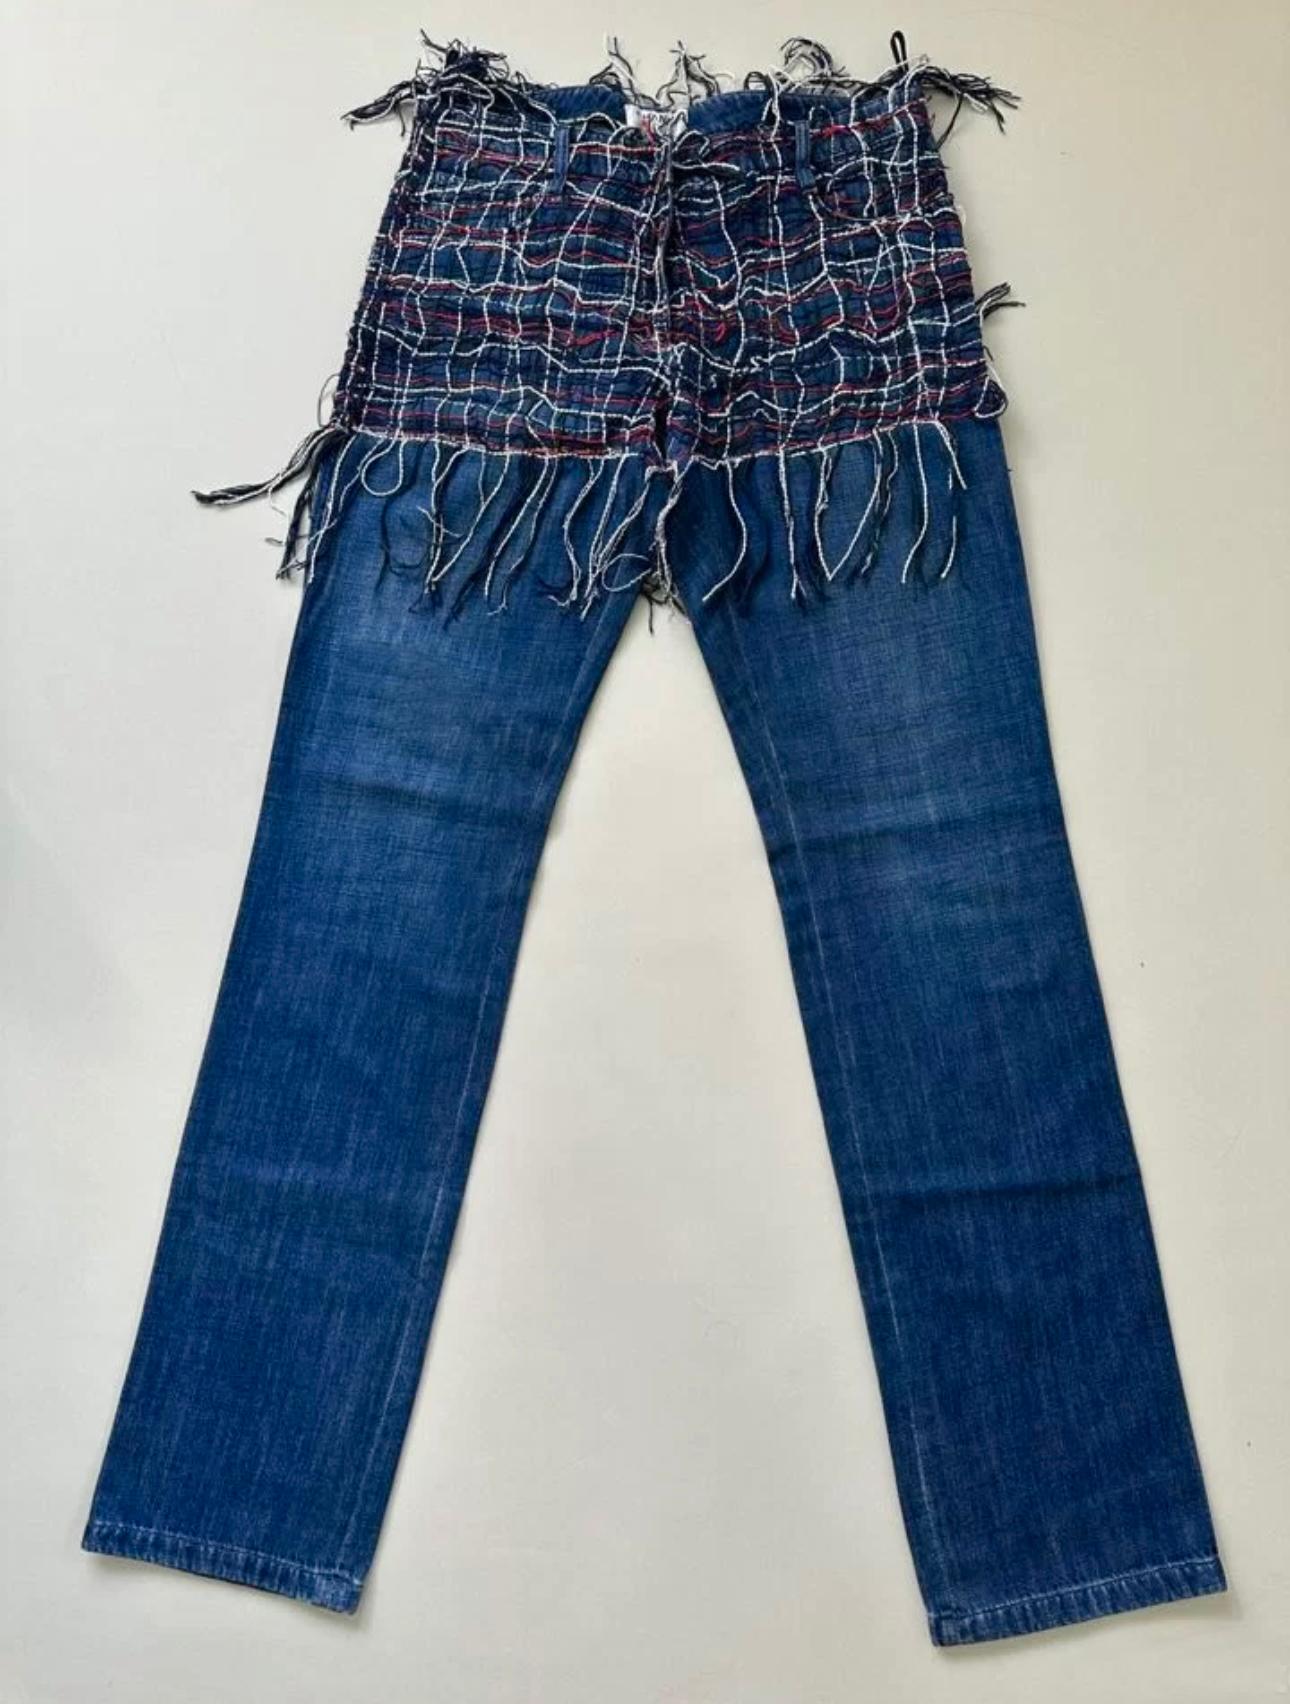 Chanel Runway Collectors Jeans with Tweed Accent For Sale 2